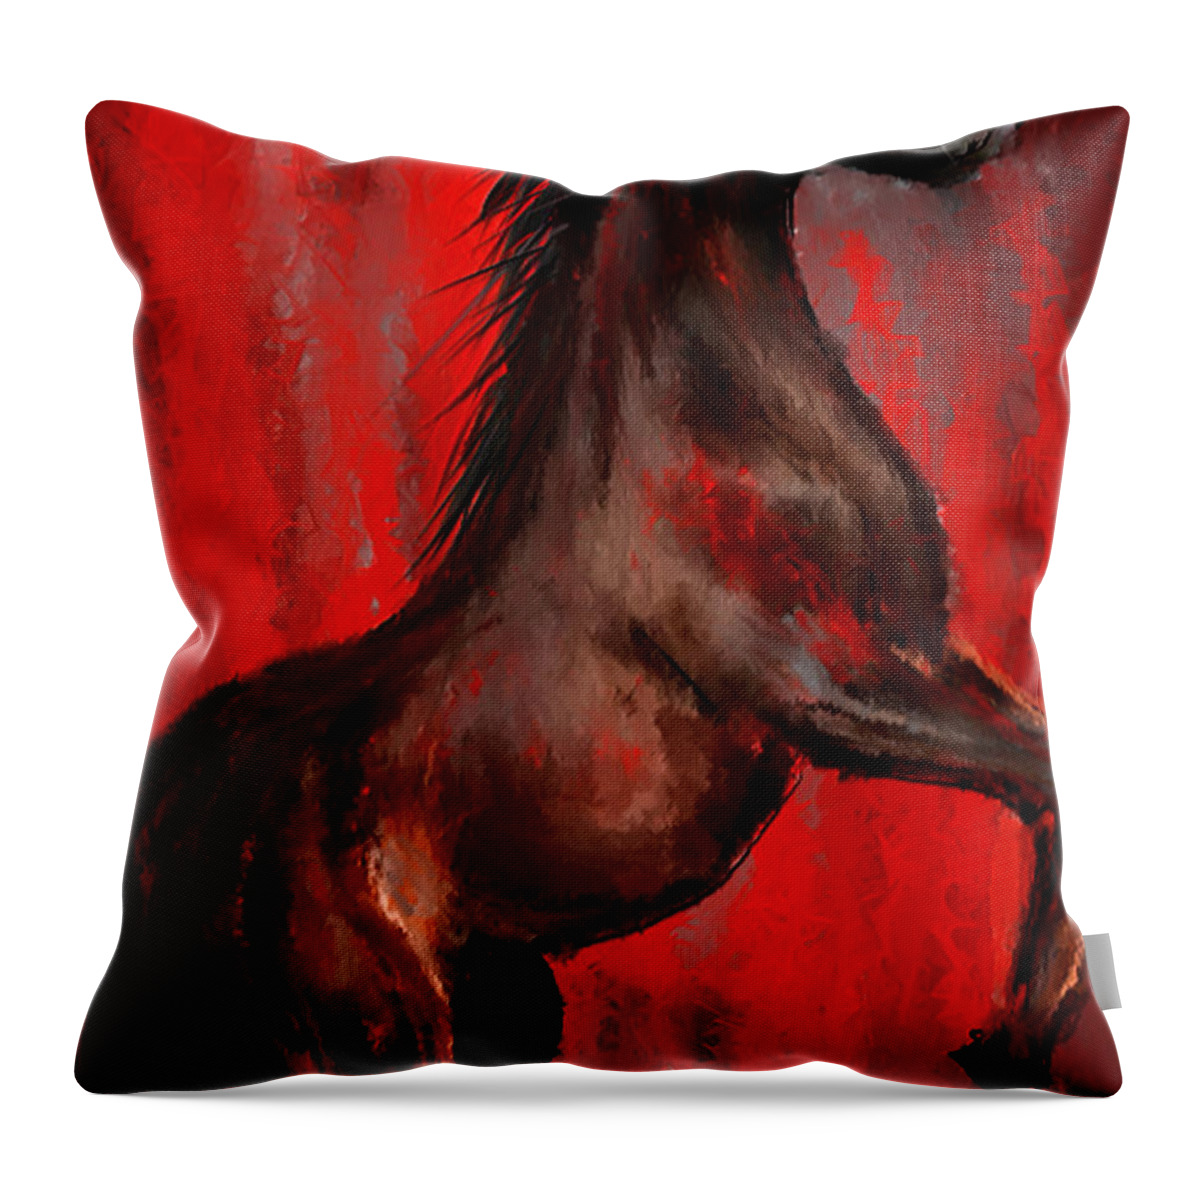 Abstract Arabian Horse Art Throw Pillow featuring the painting Glorious Red - Arabian Horse Painting by Lourry Legarde